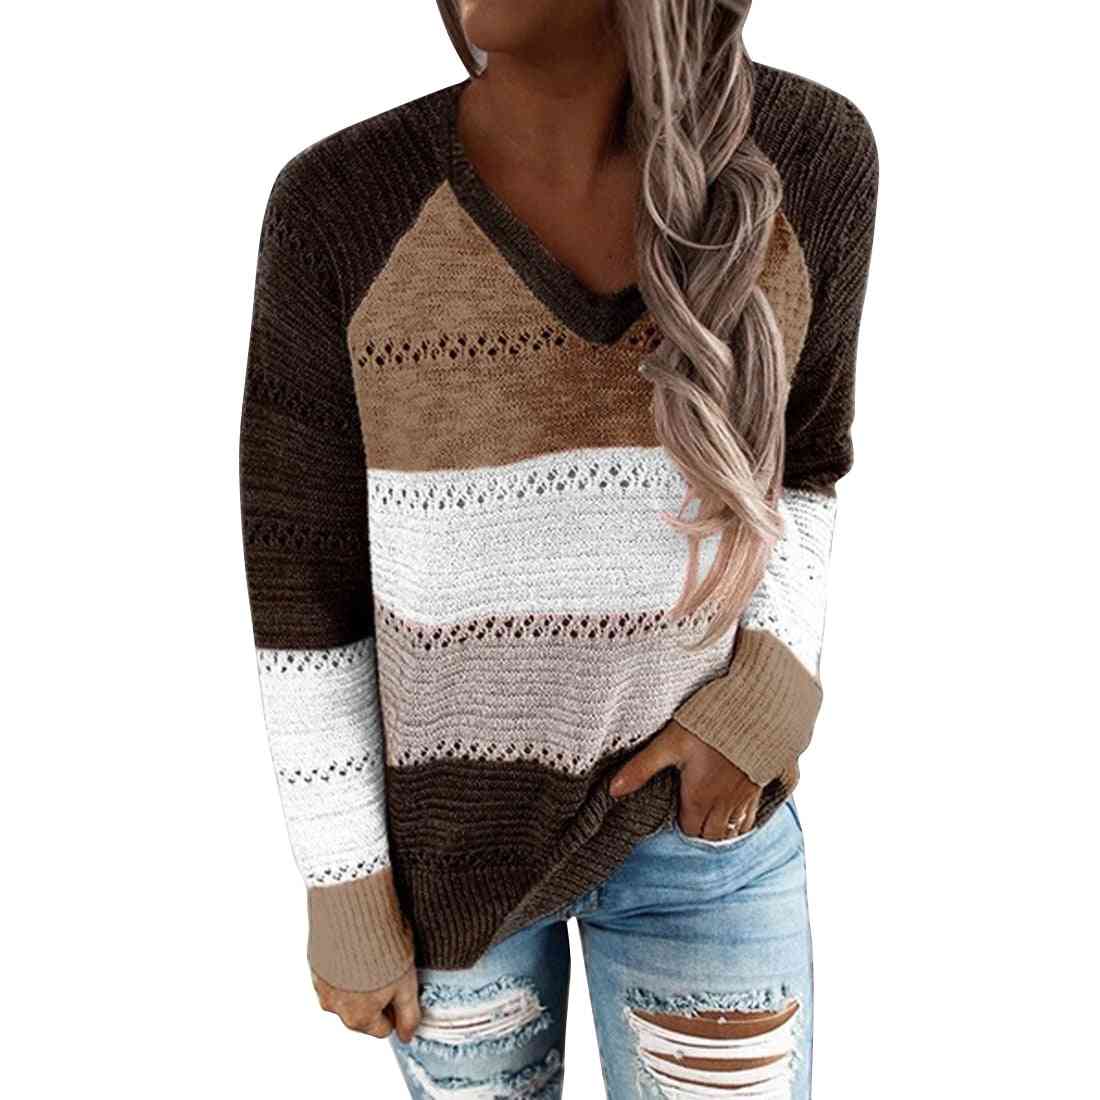 Women's Knitted Sweater- V-neck Hoodies